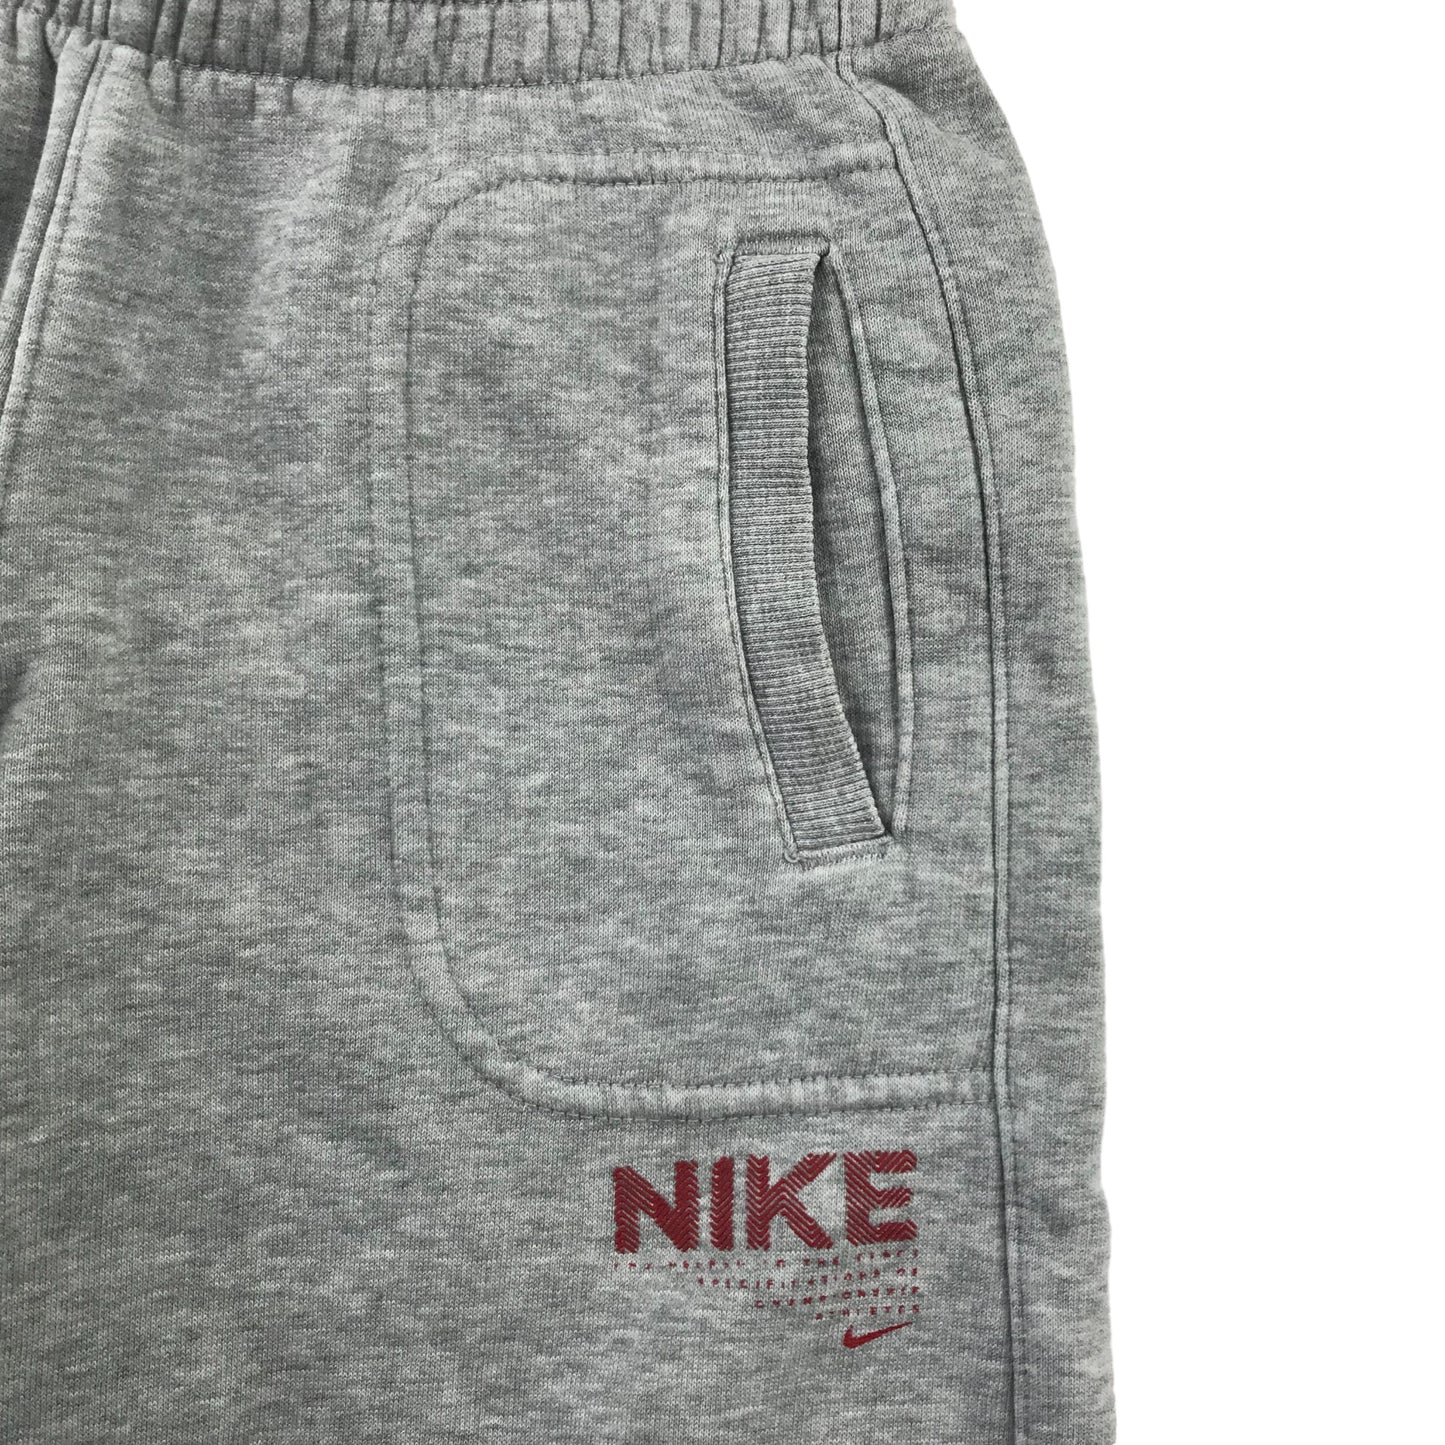 Nike Shorts Age 7 Grey Jersey Style Sporty with Logo